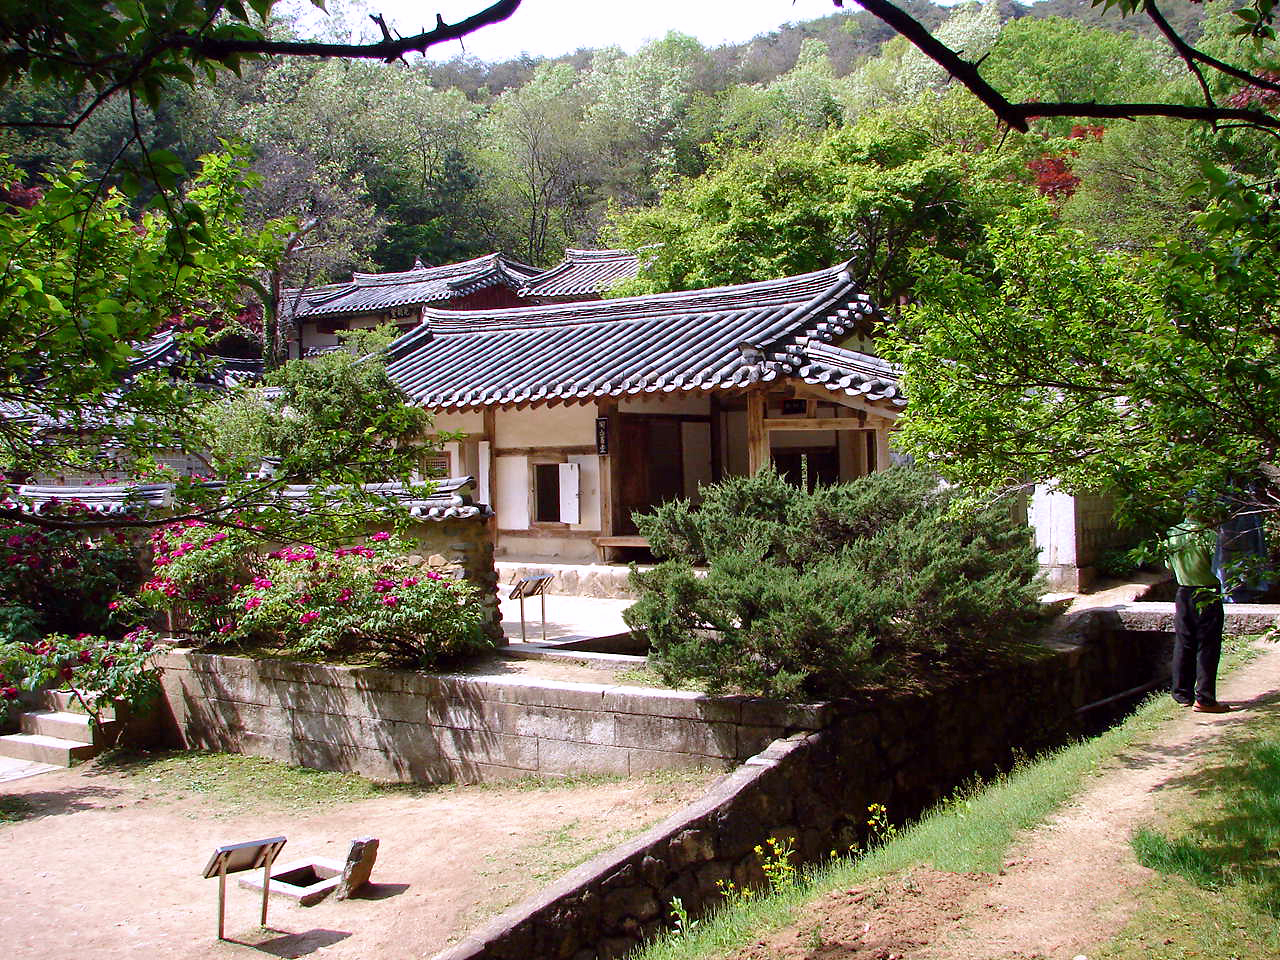 Dosan Seowon was established in 1574 in Andong, South Korea. Today, it stands as a UNESCO World Heritage and education site.